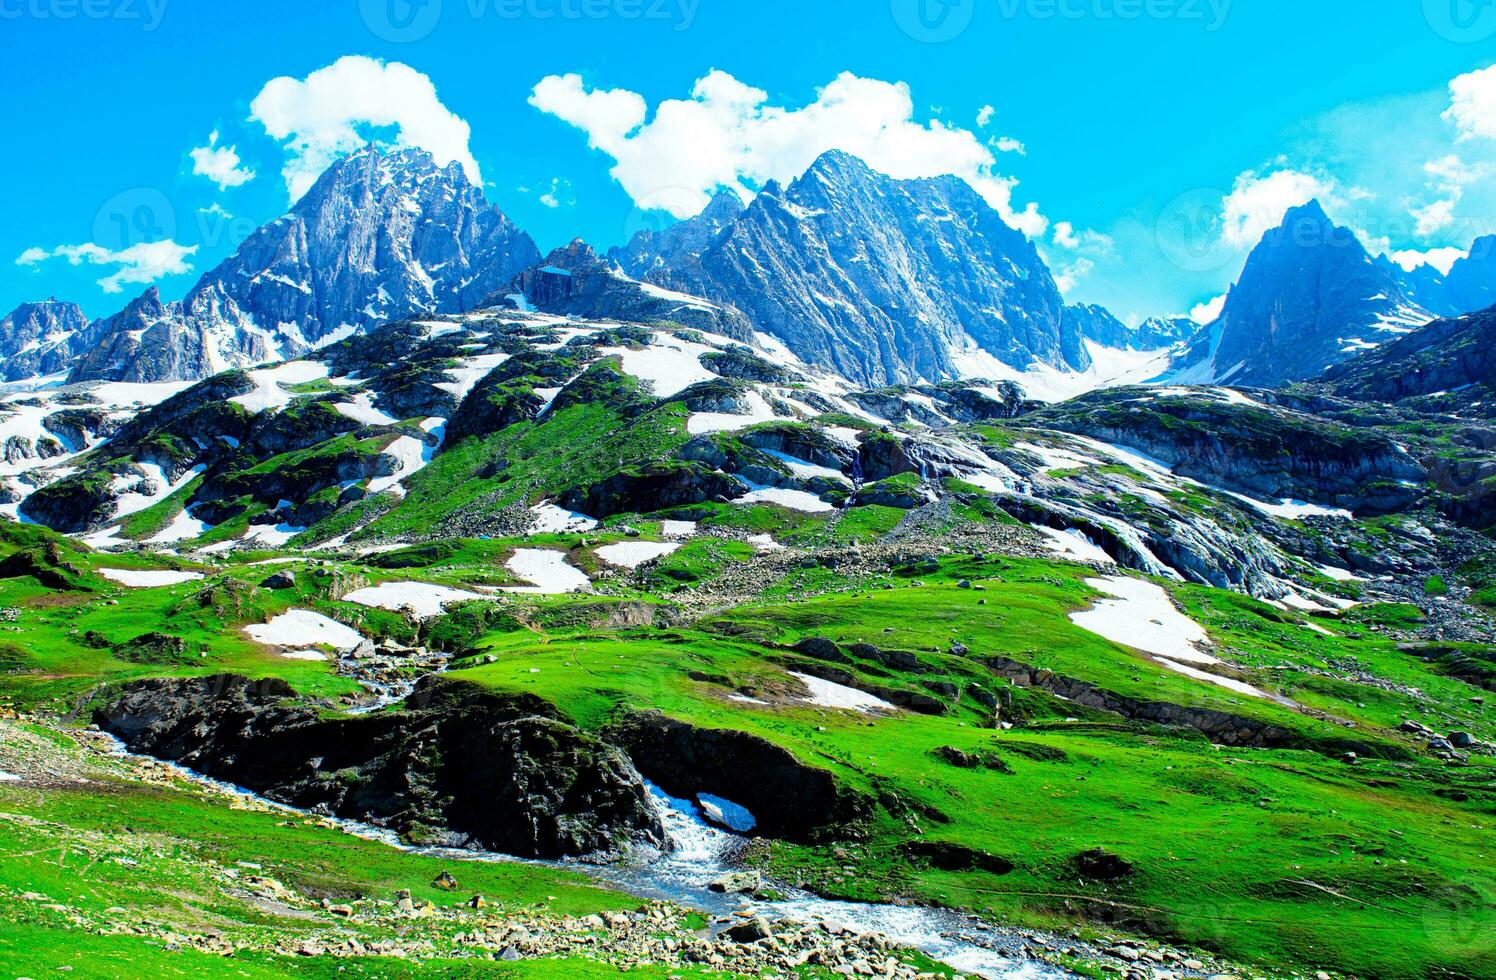 Landscape in the mountains. Panoramic view from the top of Sonmarg, Kashmir valley in the Himalayan region. meadows, alpine trees, wildflowers and snow on mountain in india. Concept travel nature. photo